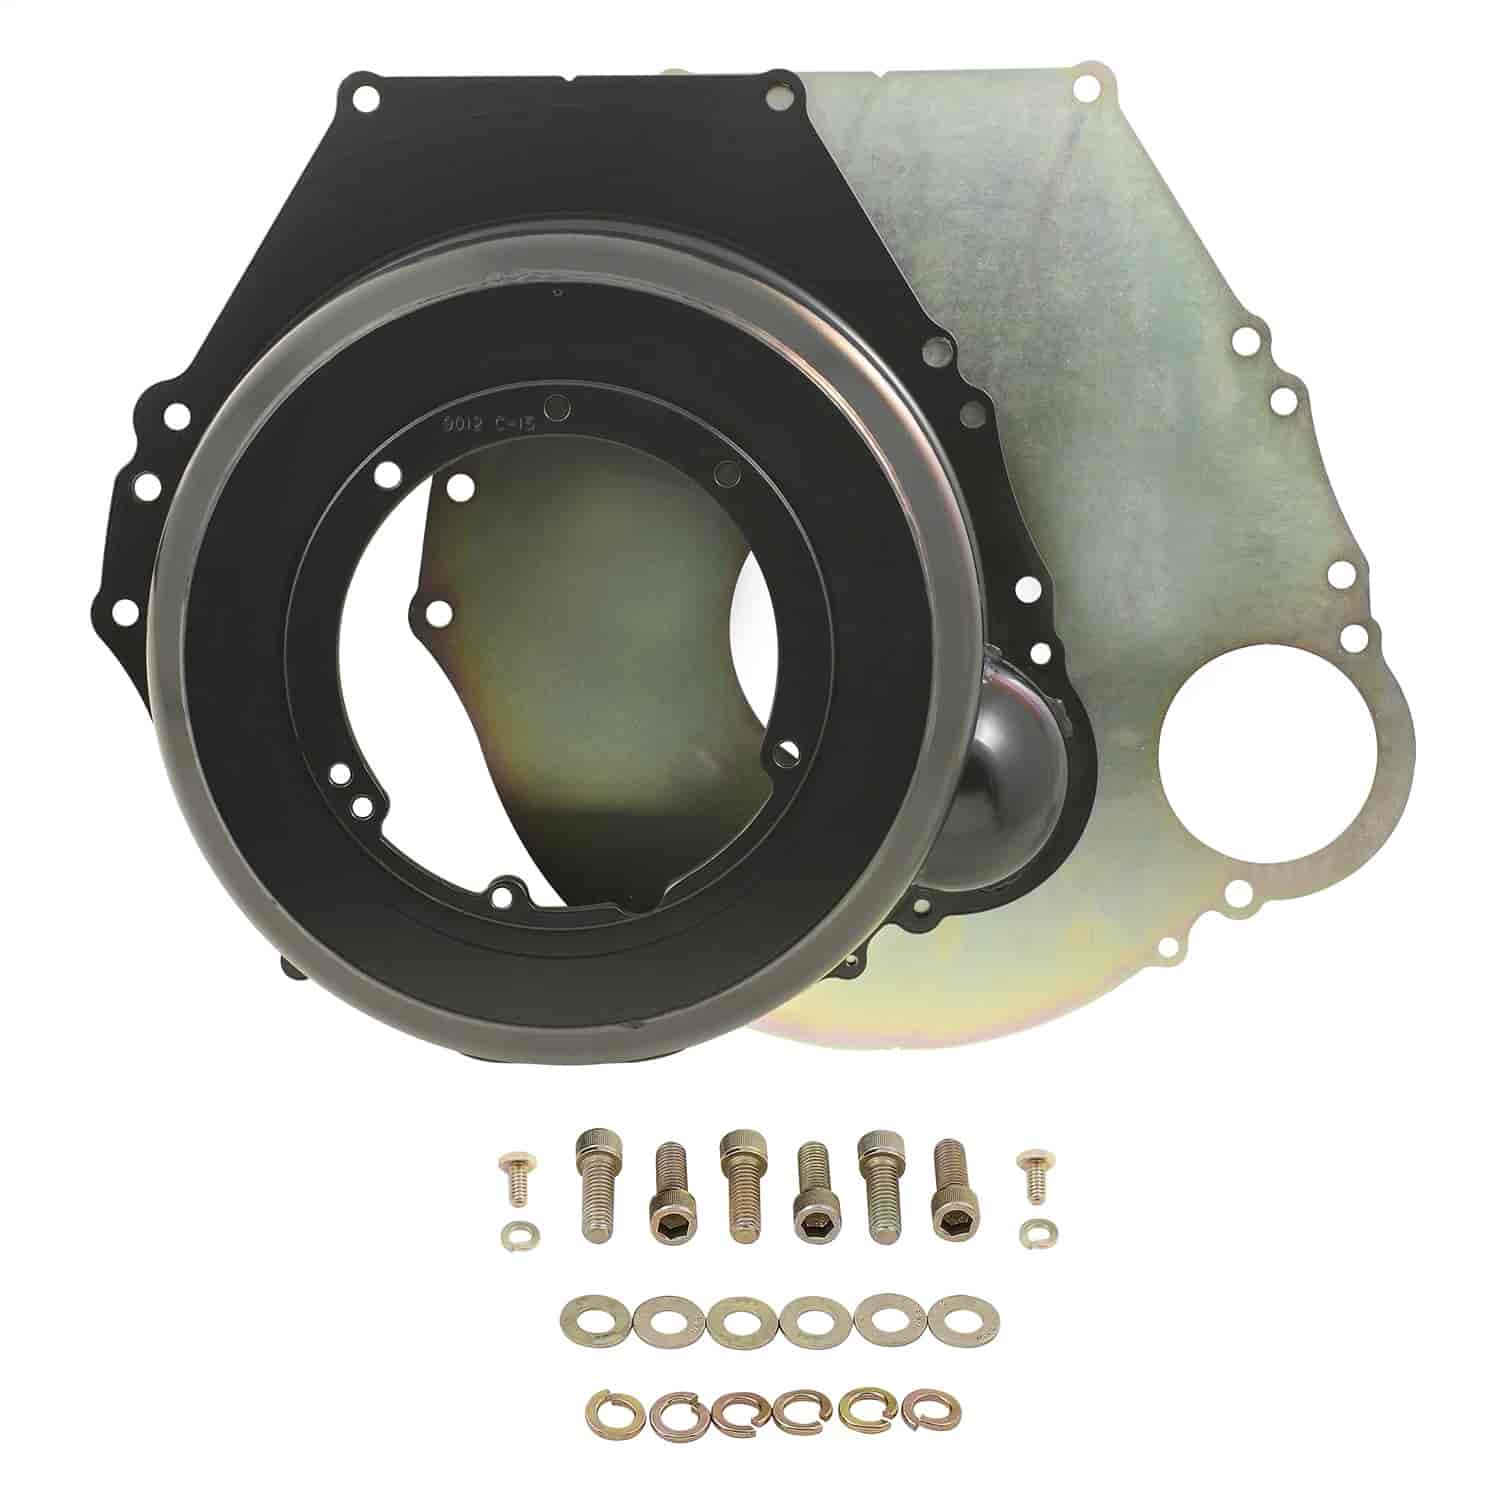 Engine To Transmission Adapter For Use When Adapting Ford 460 To AOD Transmission